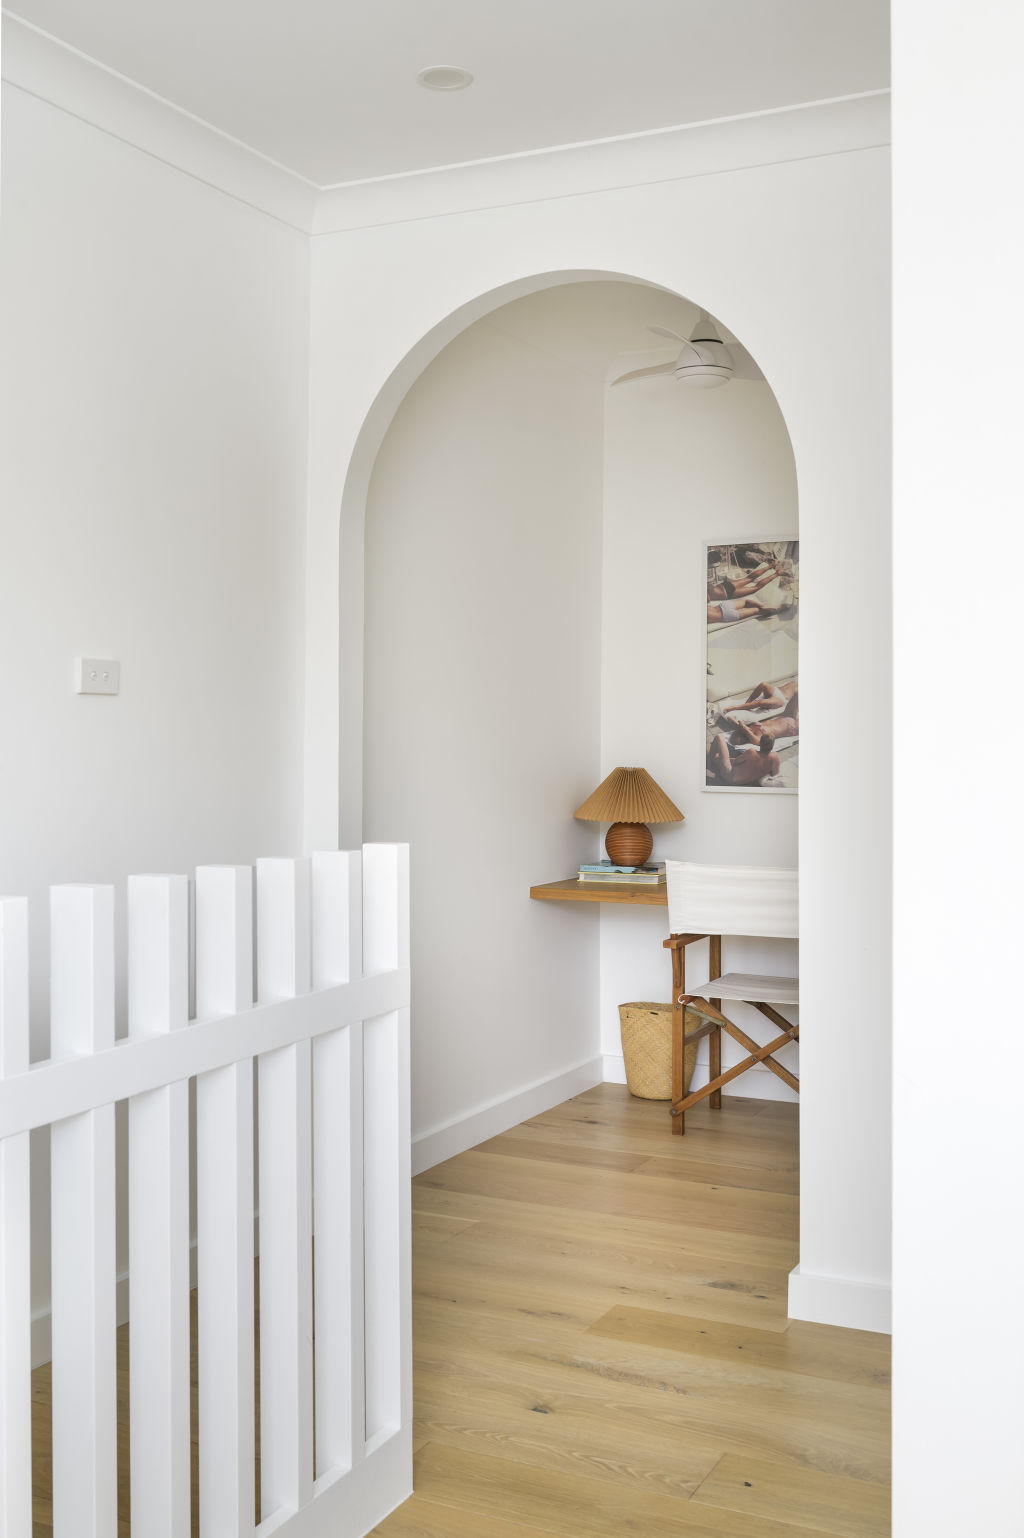 A favourite project was transforming a poky linen closet at the top of the stairs into a cute study nook, complete with storage. Photo: Atelier Photography